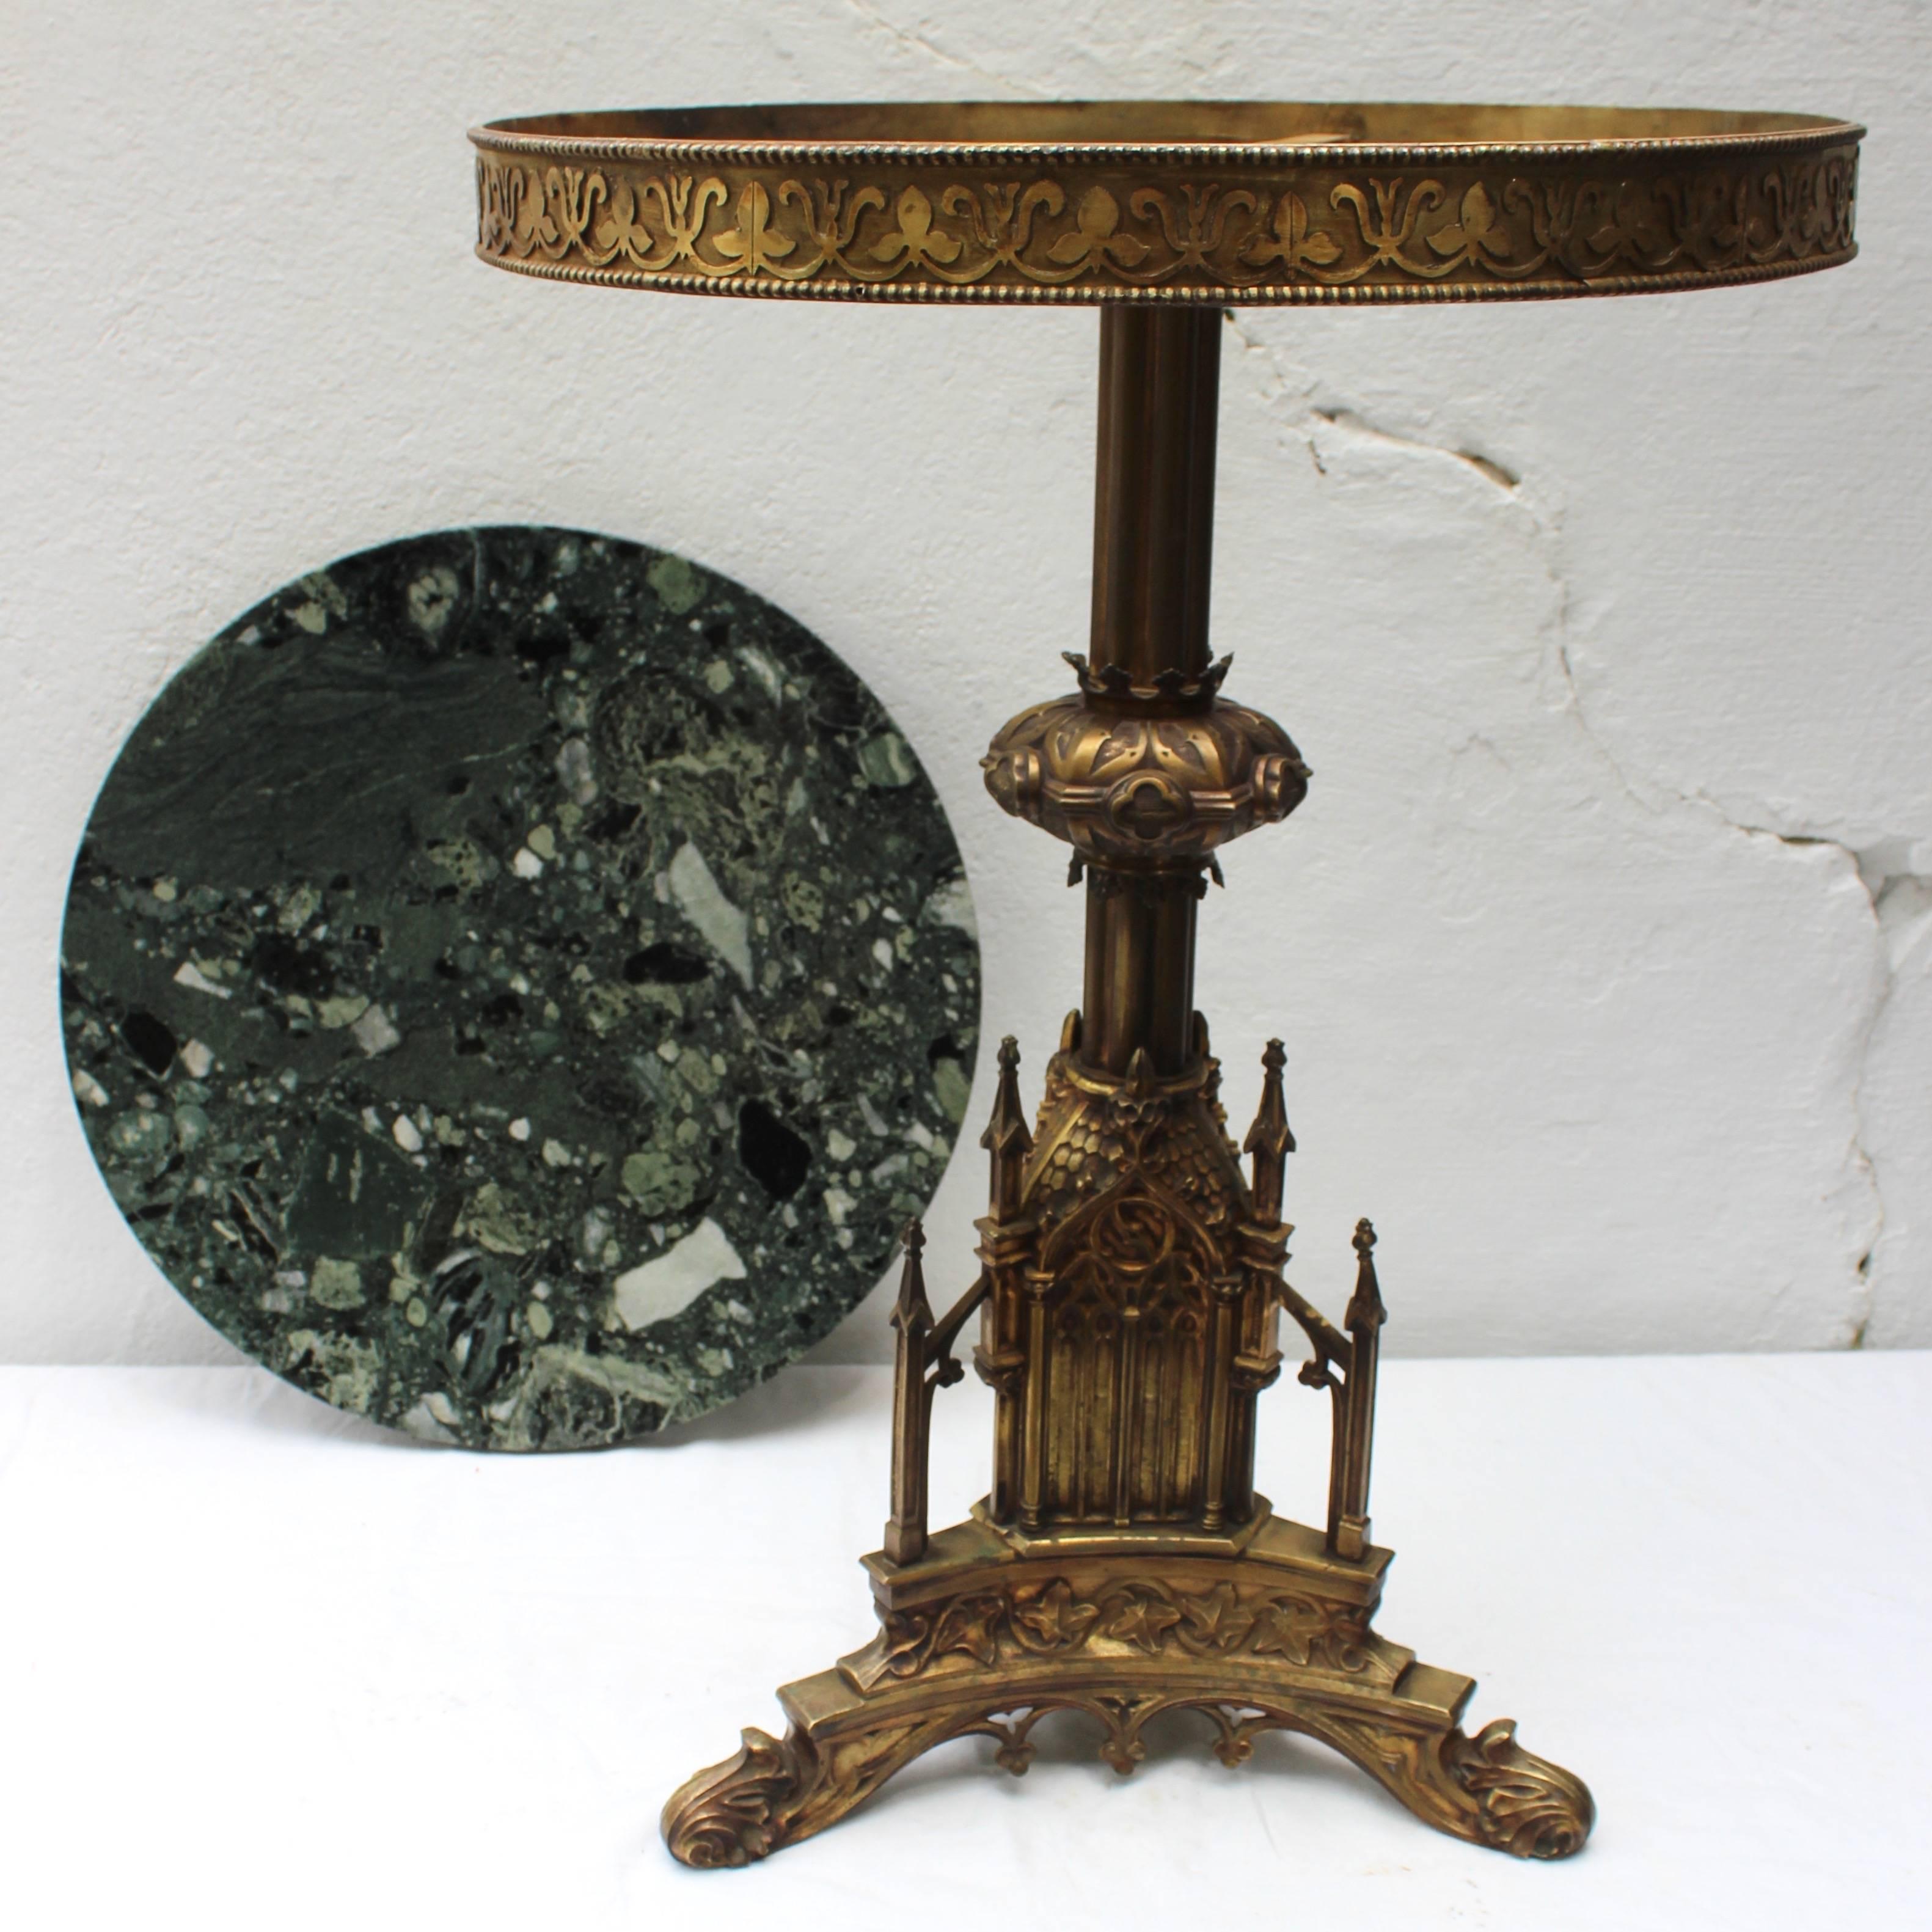 19th century important architectural bronze Gothic style table with Italian marble top.

Marble marked 